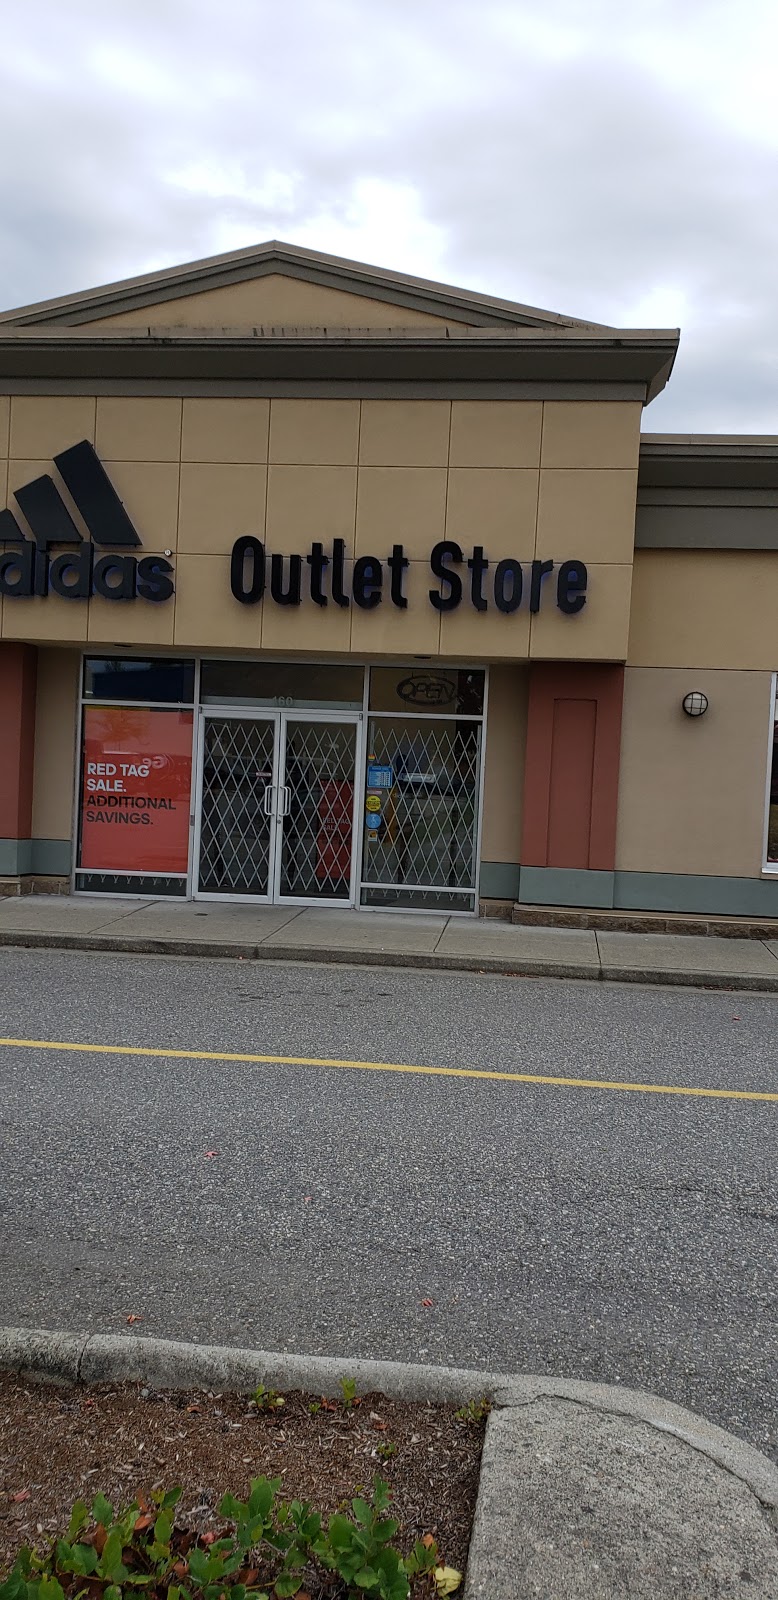 adidas langley outlet